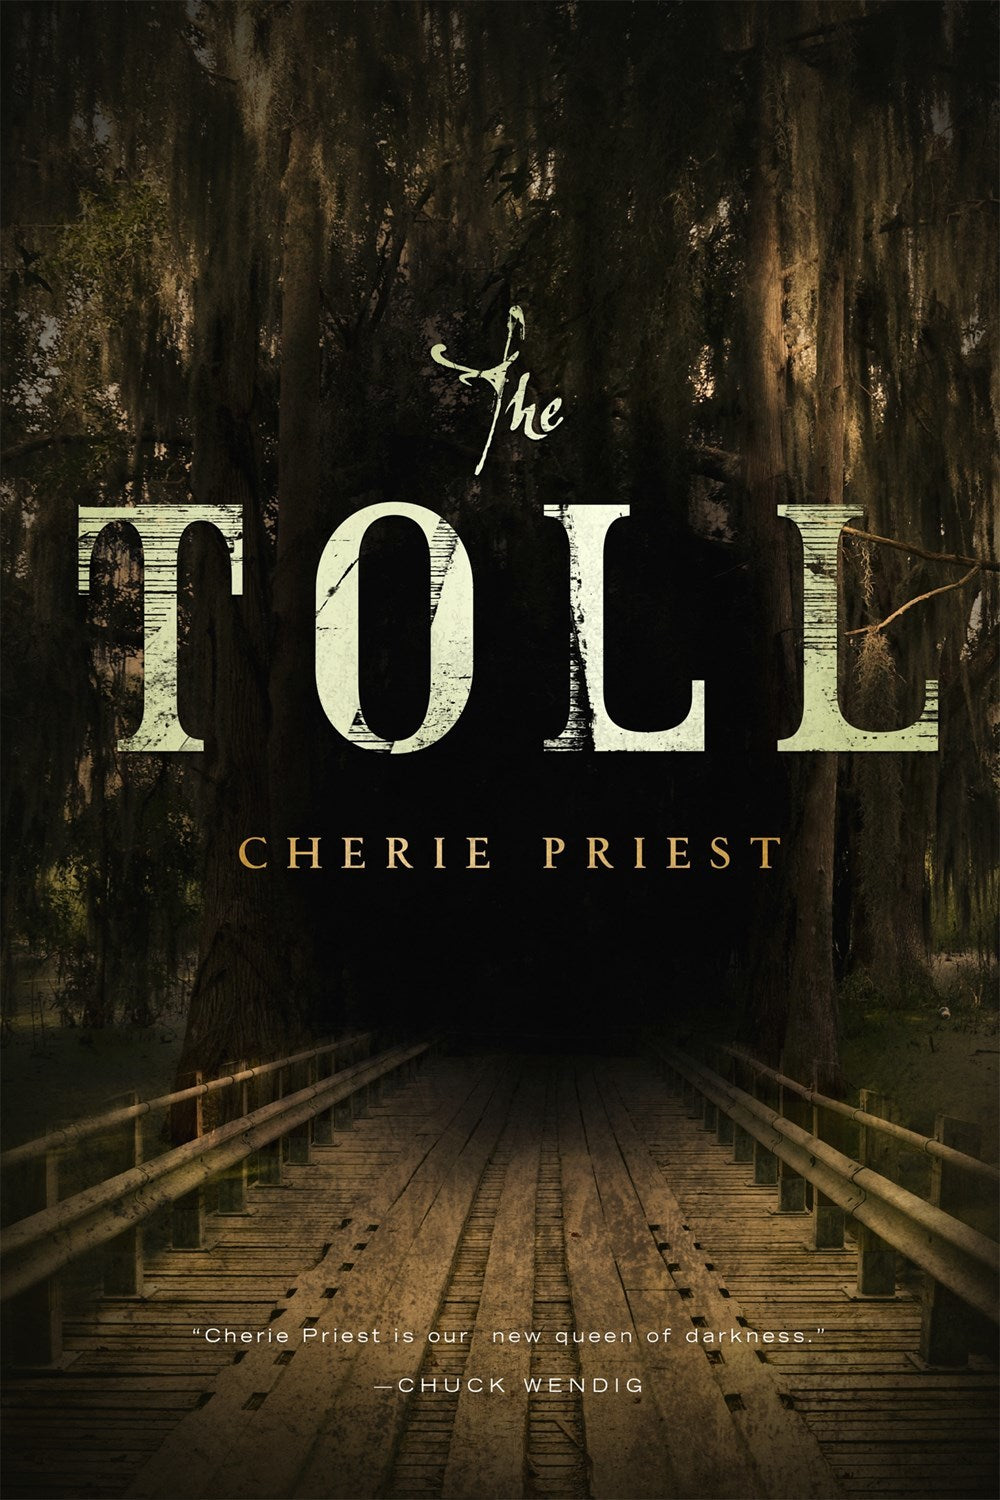 Beth & Tav's Side by Side Review of THE TOLL by Cherie Priest